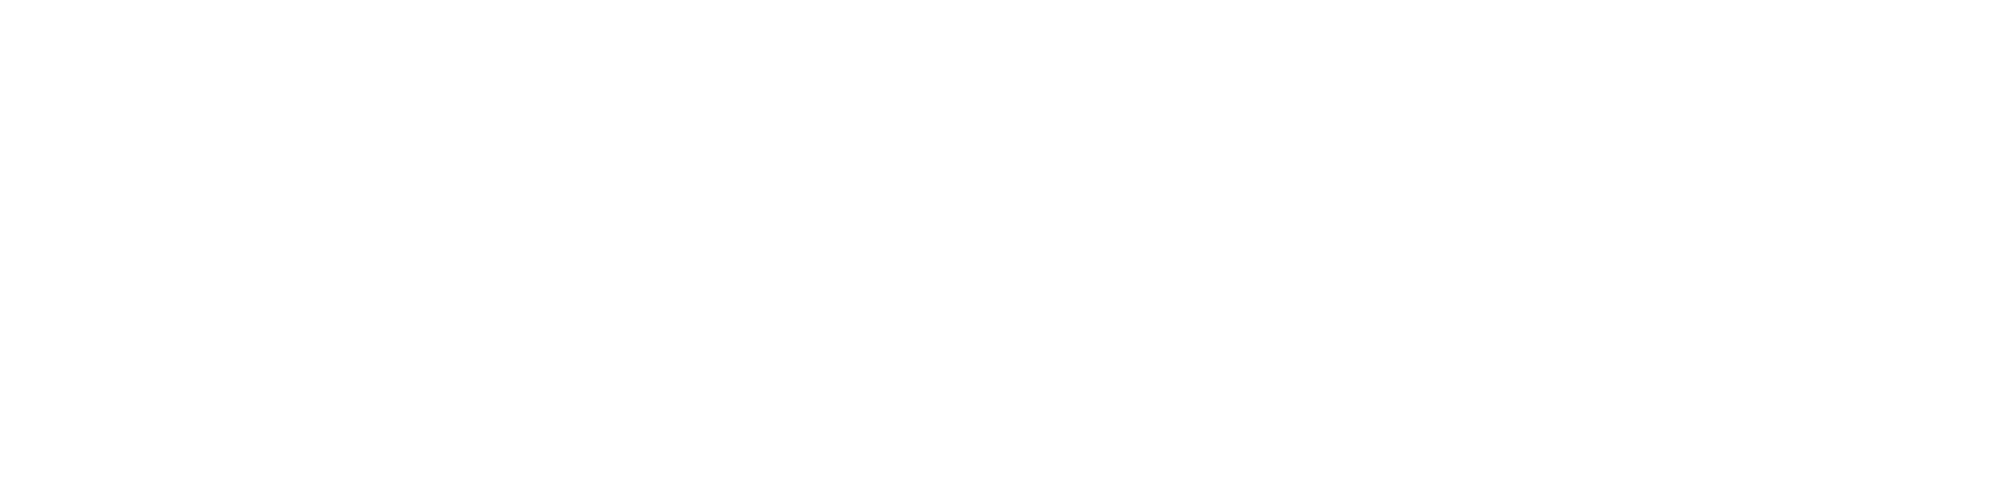 contact_full_banner